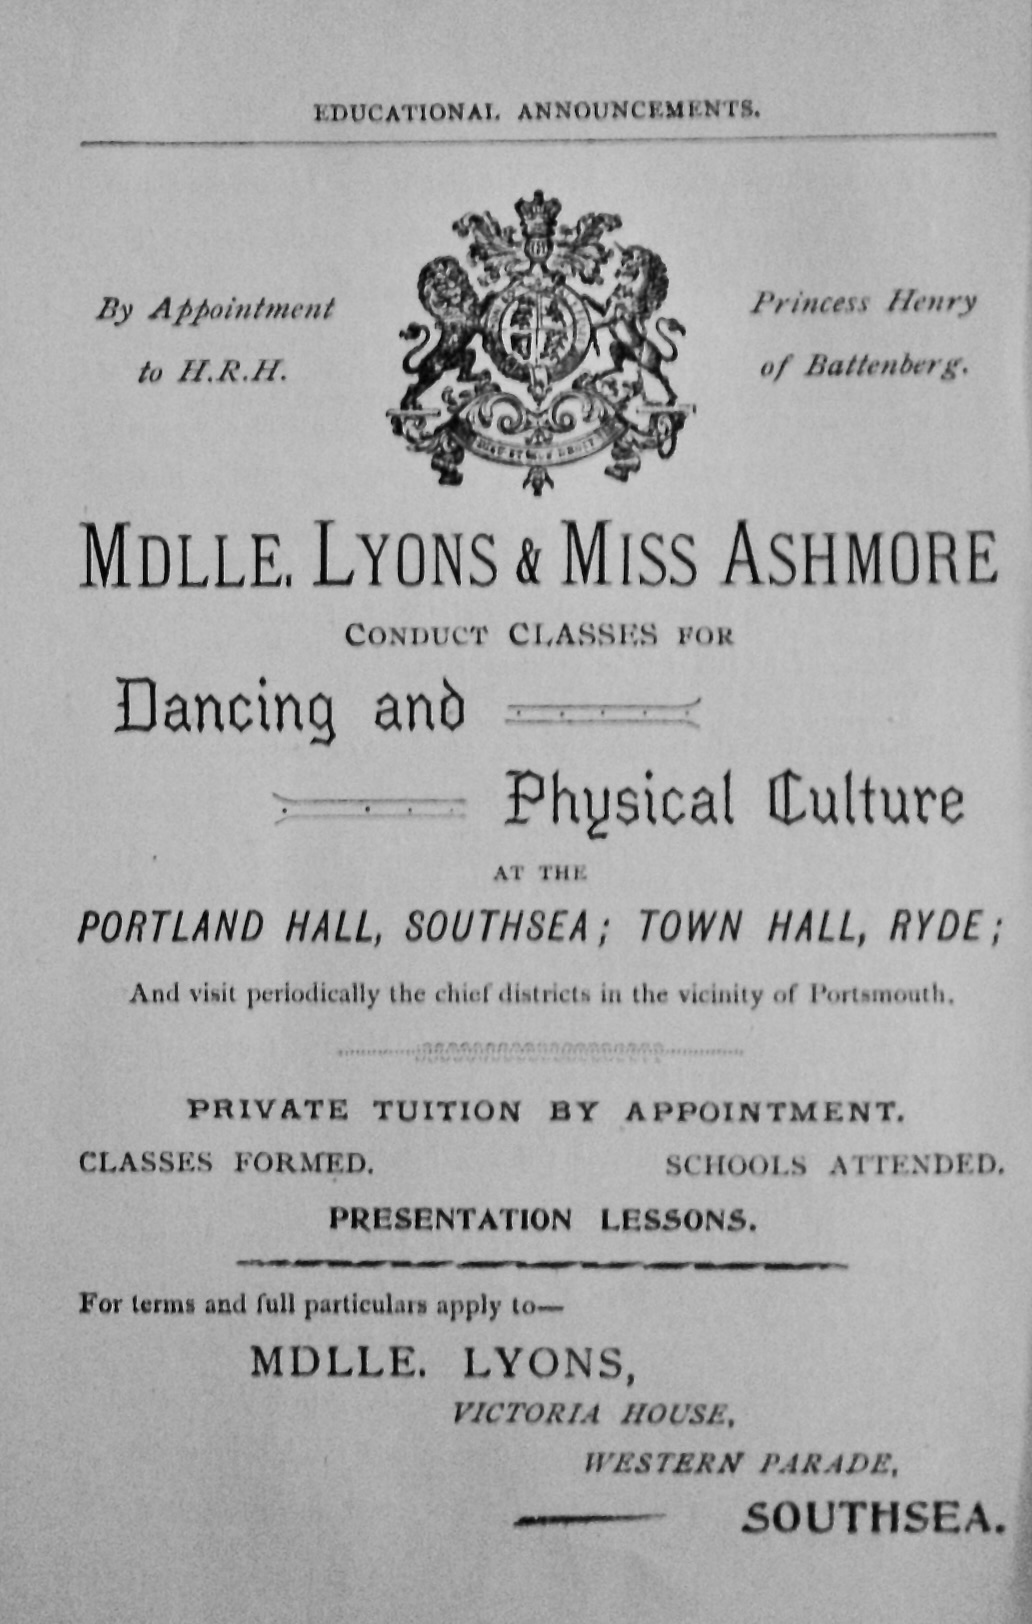 Mdlle. Lyons & Miss Ashmore Conduct Classes for Dancing and Physical Cultur